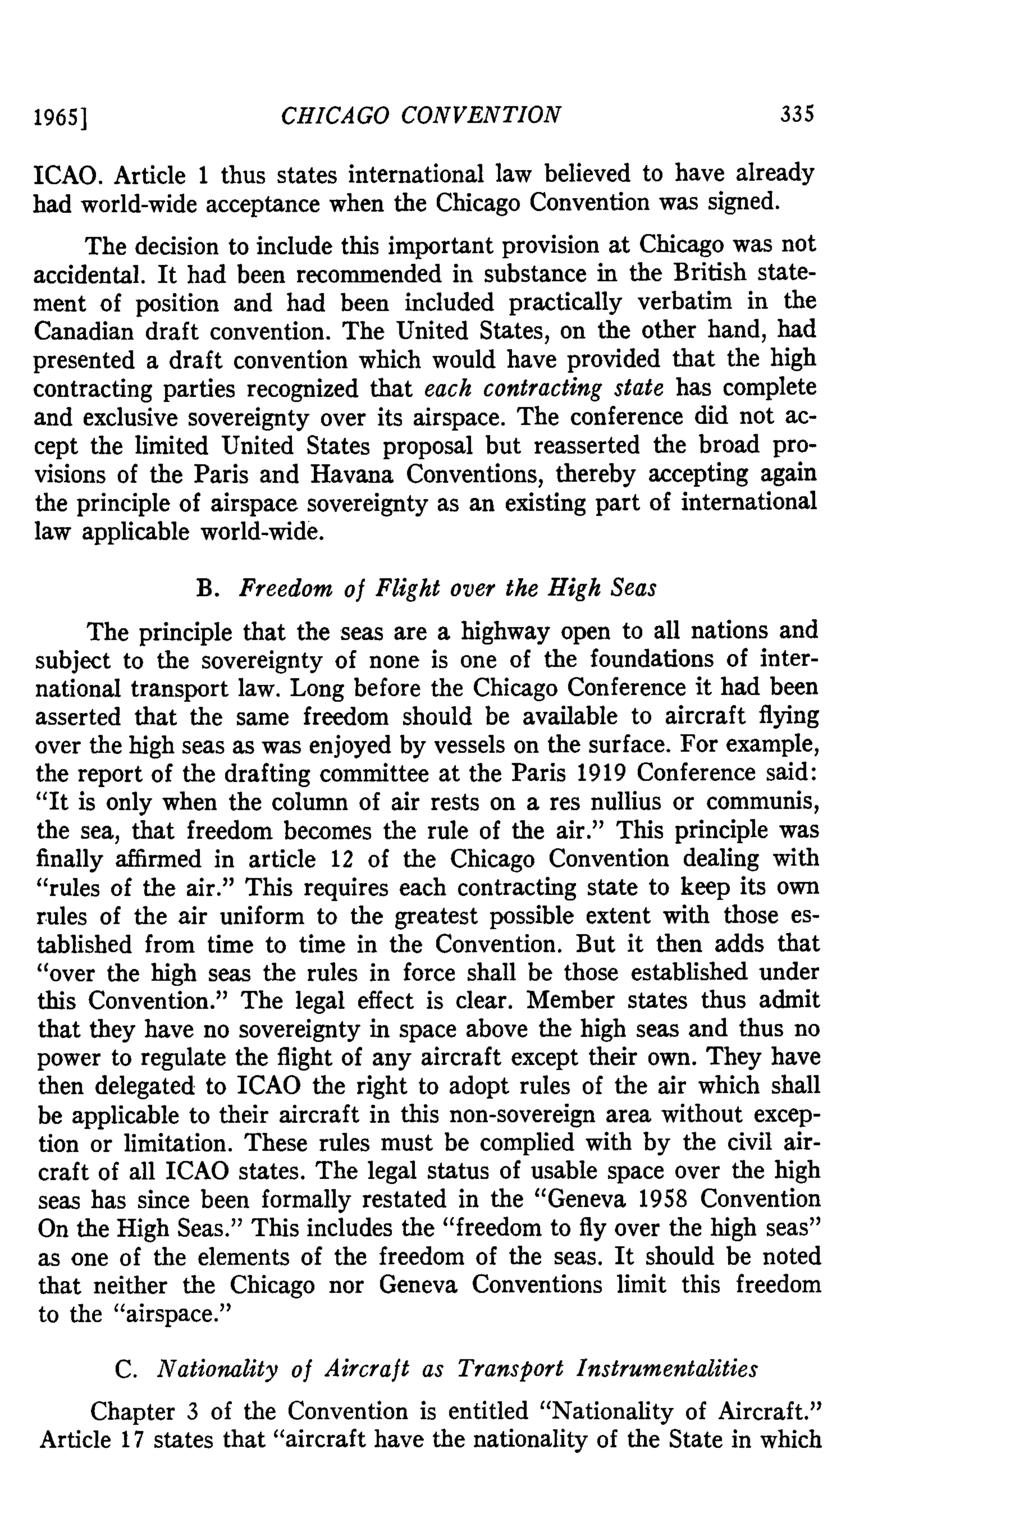 19651 CHICAGO CONVENTION ICAO. Article 1 thus states international law believed to have already had world-wide acceptance when the Chicago Convention was signed.